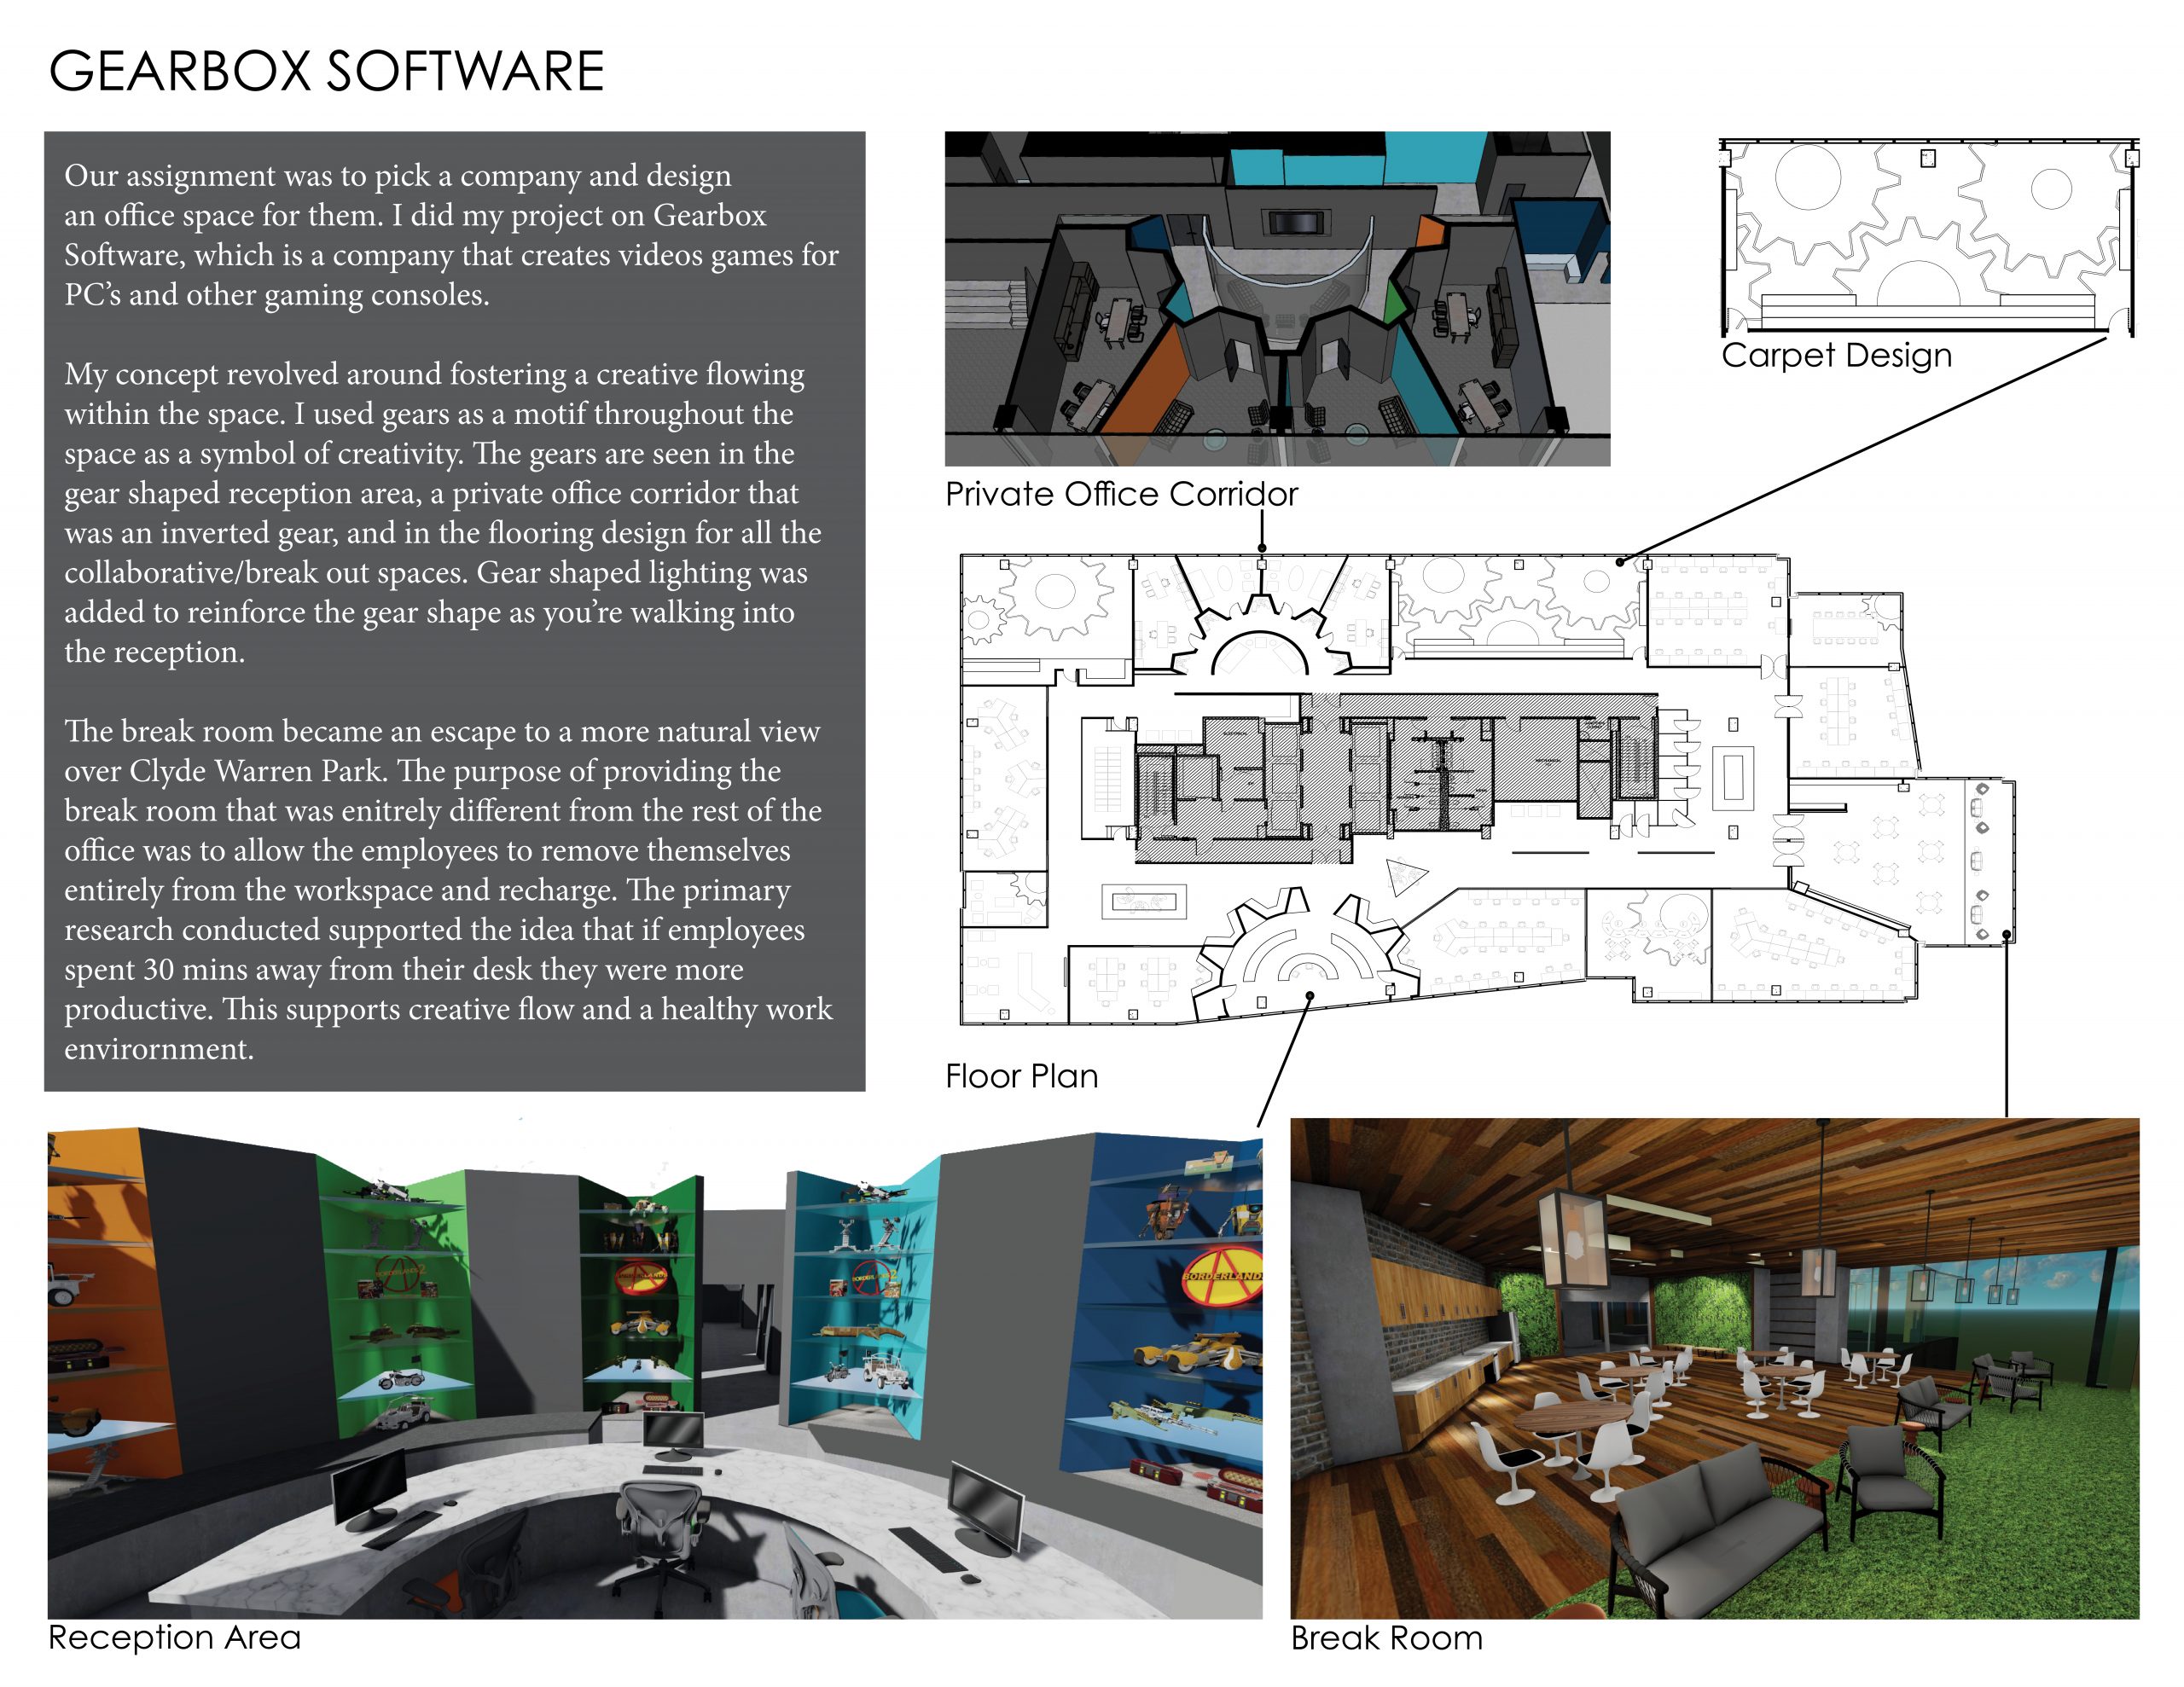 Gearbox software - Office space floorplan and designs